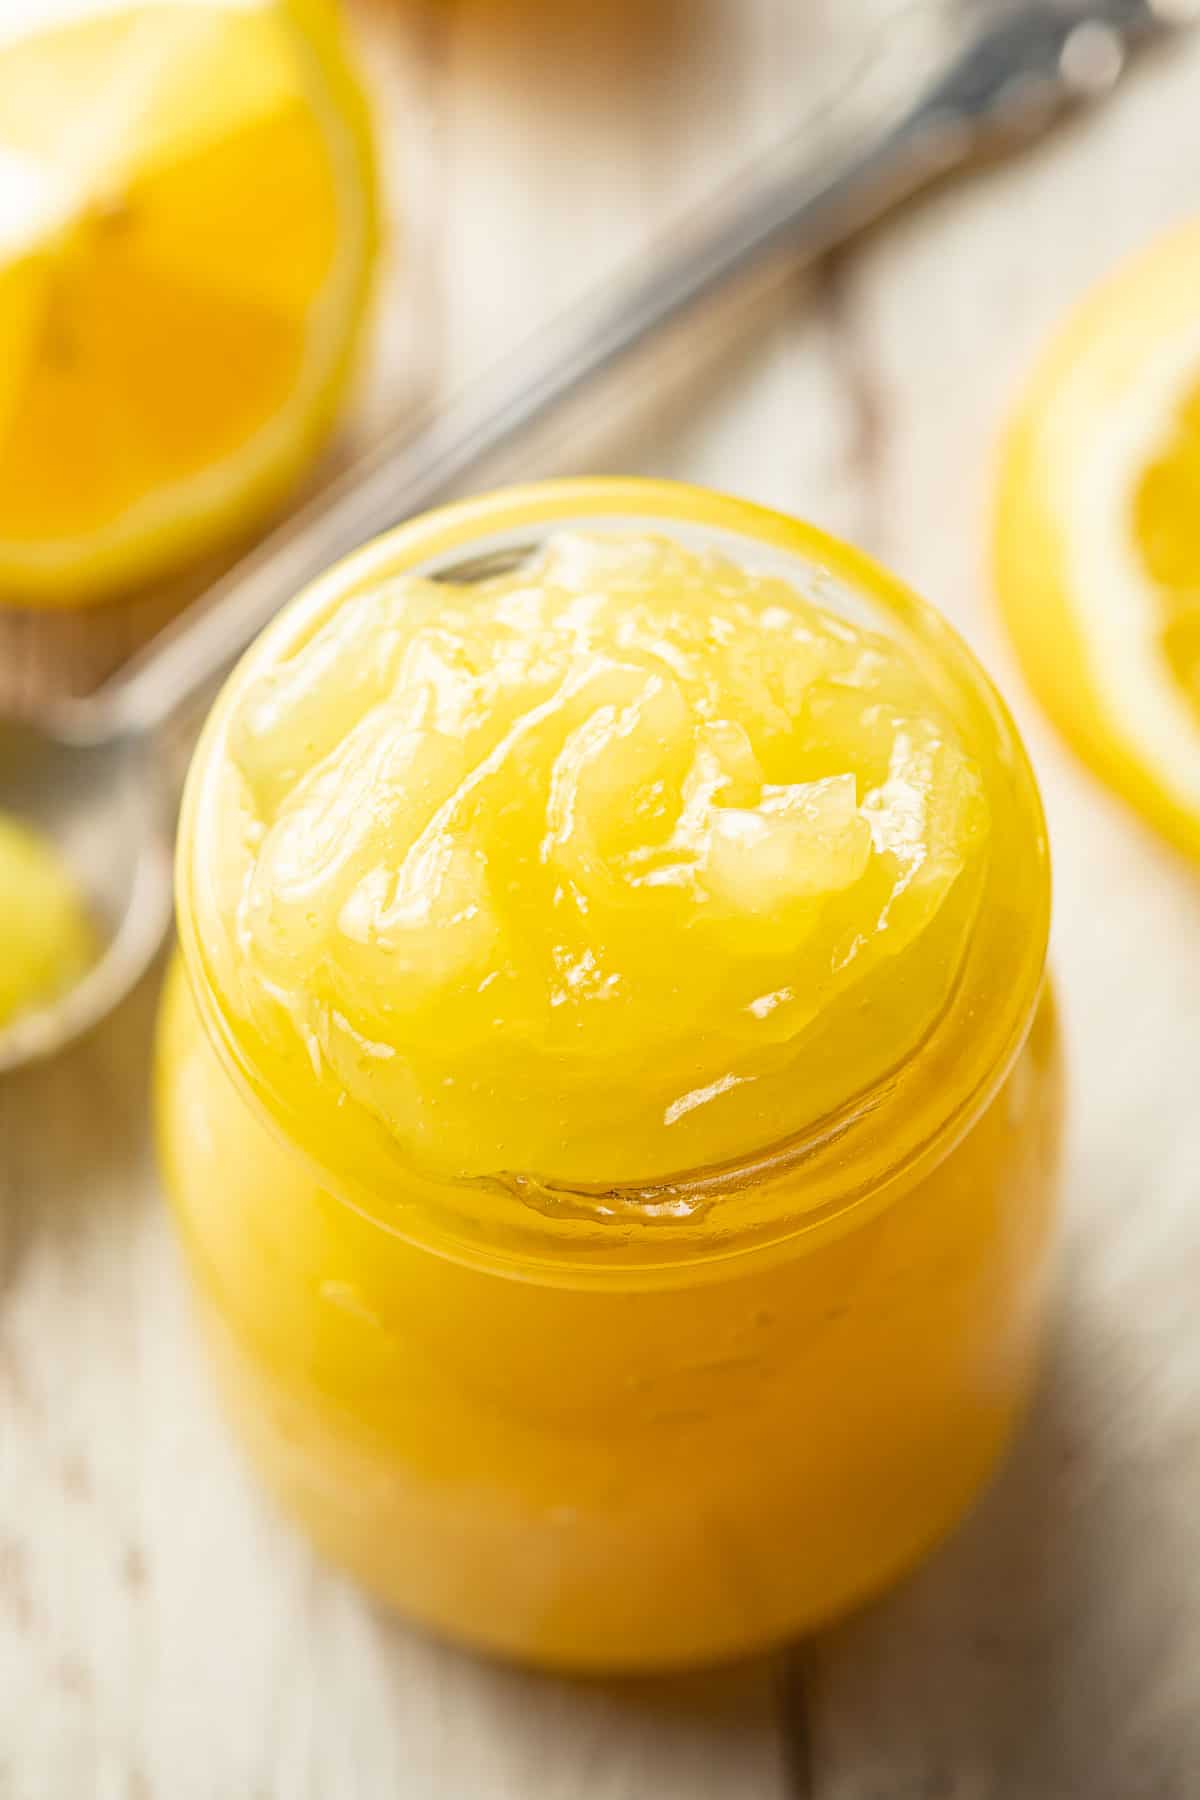 This vegan lemon curd is thick, rich, and bursting with tangy lemon flavor! It's easy to make with just 7 ingredients and perfect for slathering on toast, spreading on scones or stuffing a pie!